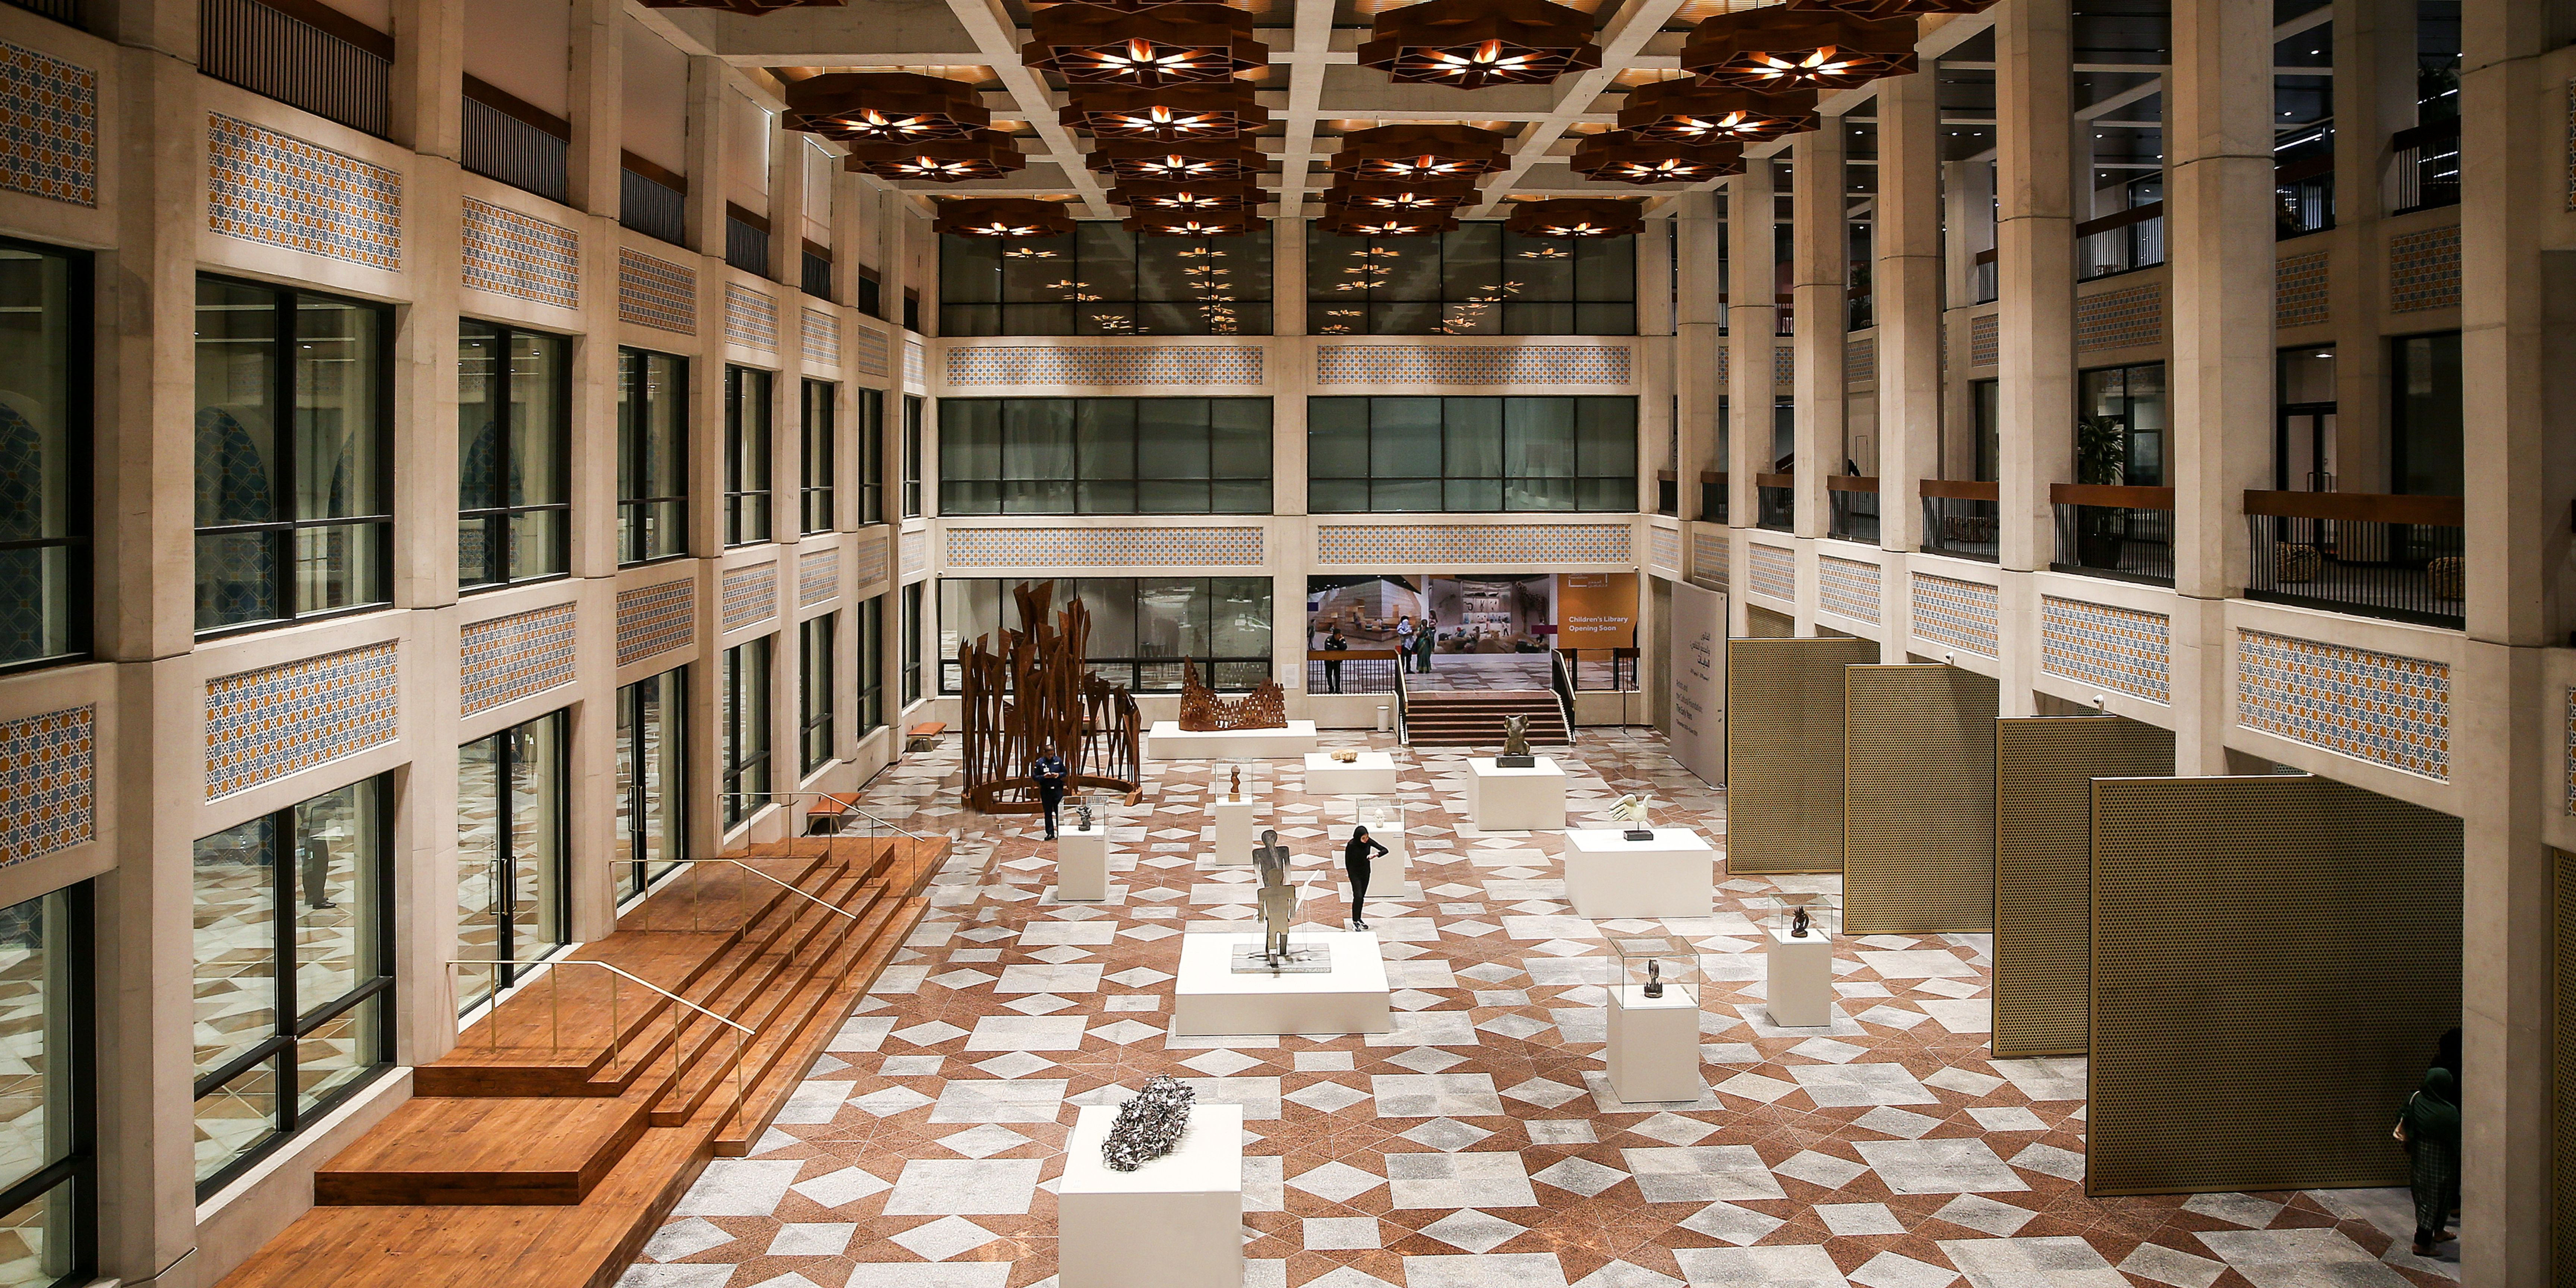 Interior of the Stavros Niarchos Foundation Cultural Center showing an exhibition space with sculptures and installations.